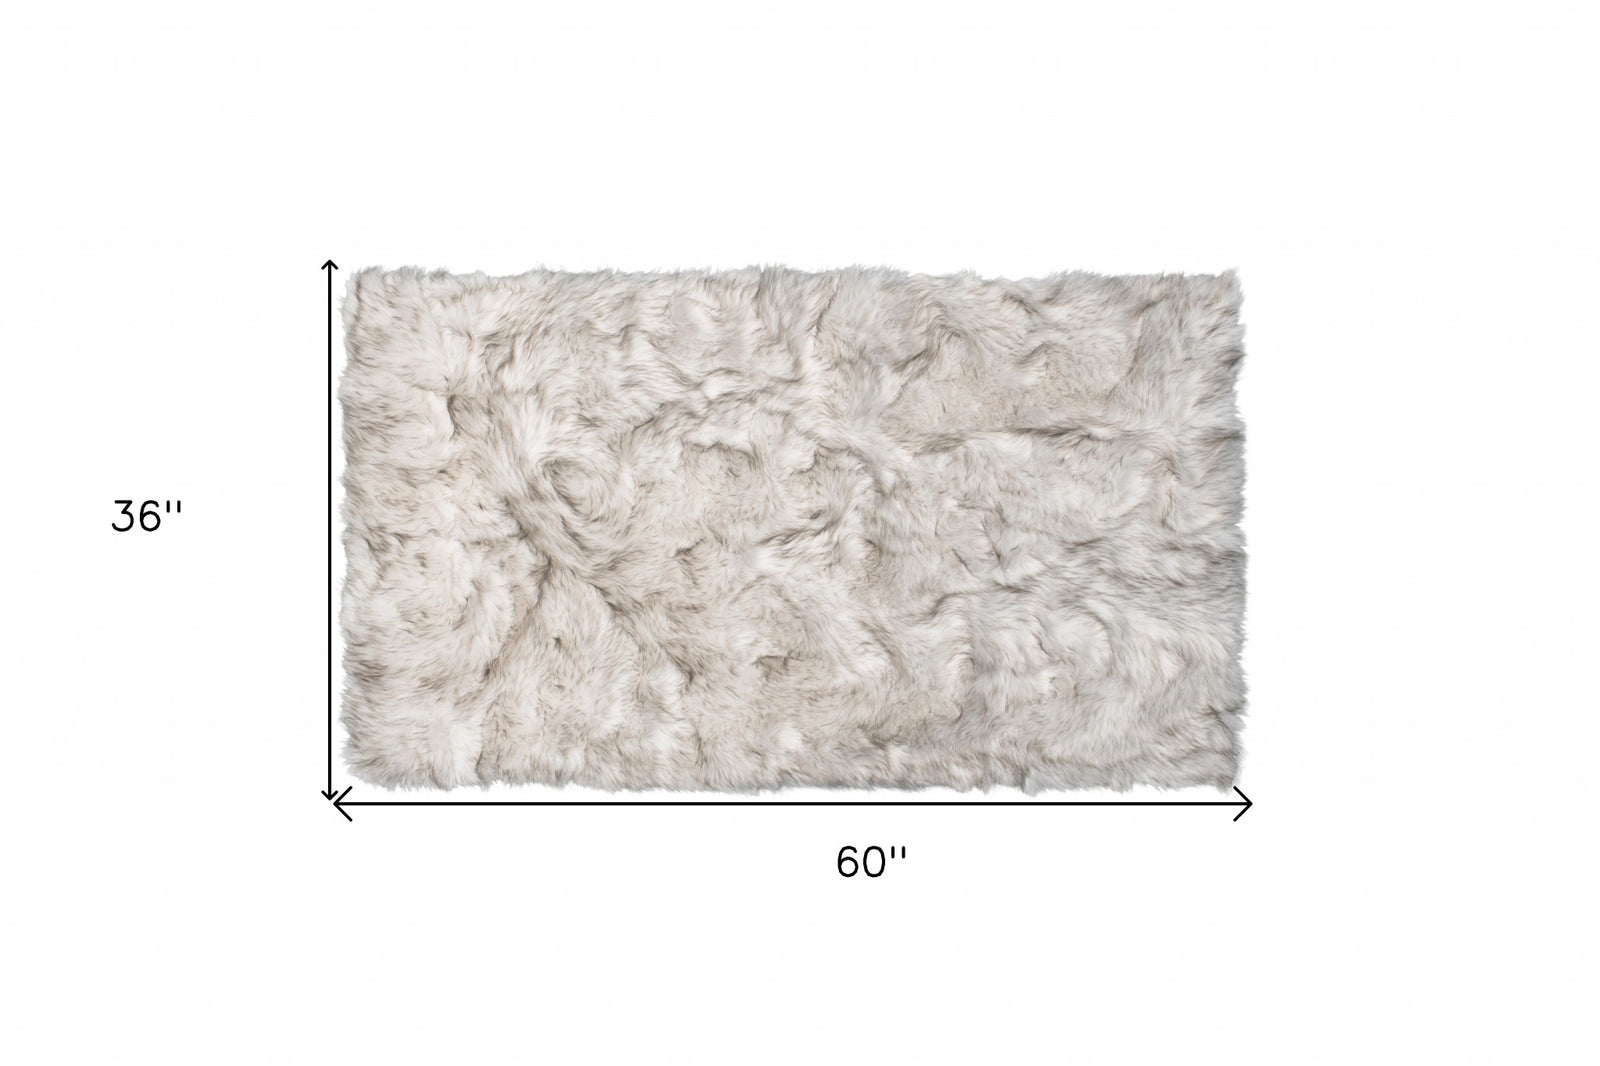 3' X 5' Chocolate Faux Fur Ombre Non Skid Area Rug